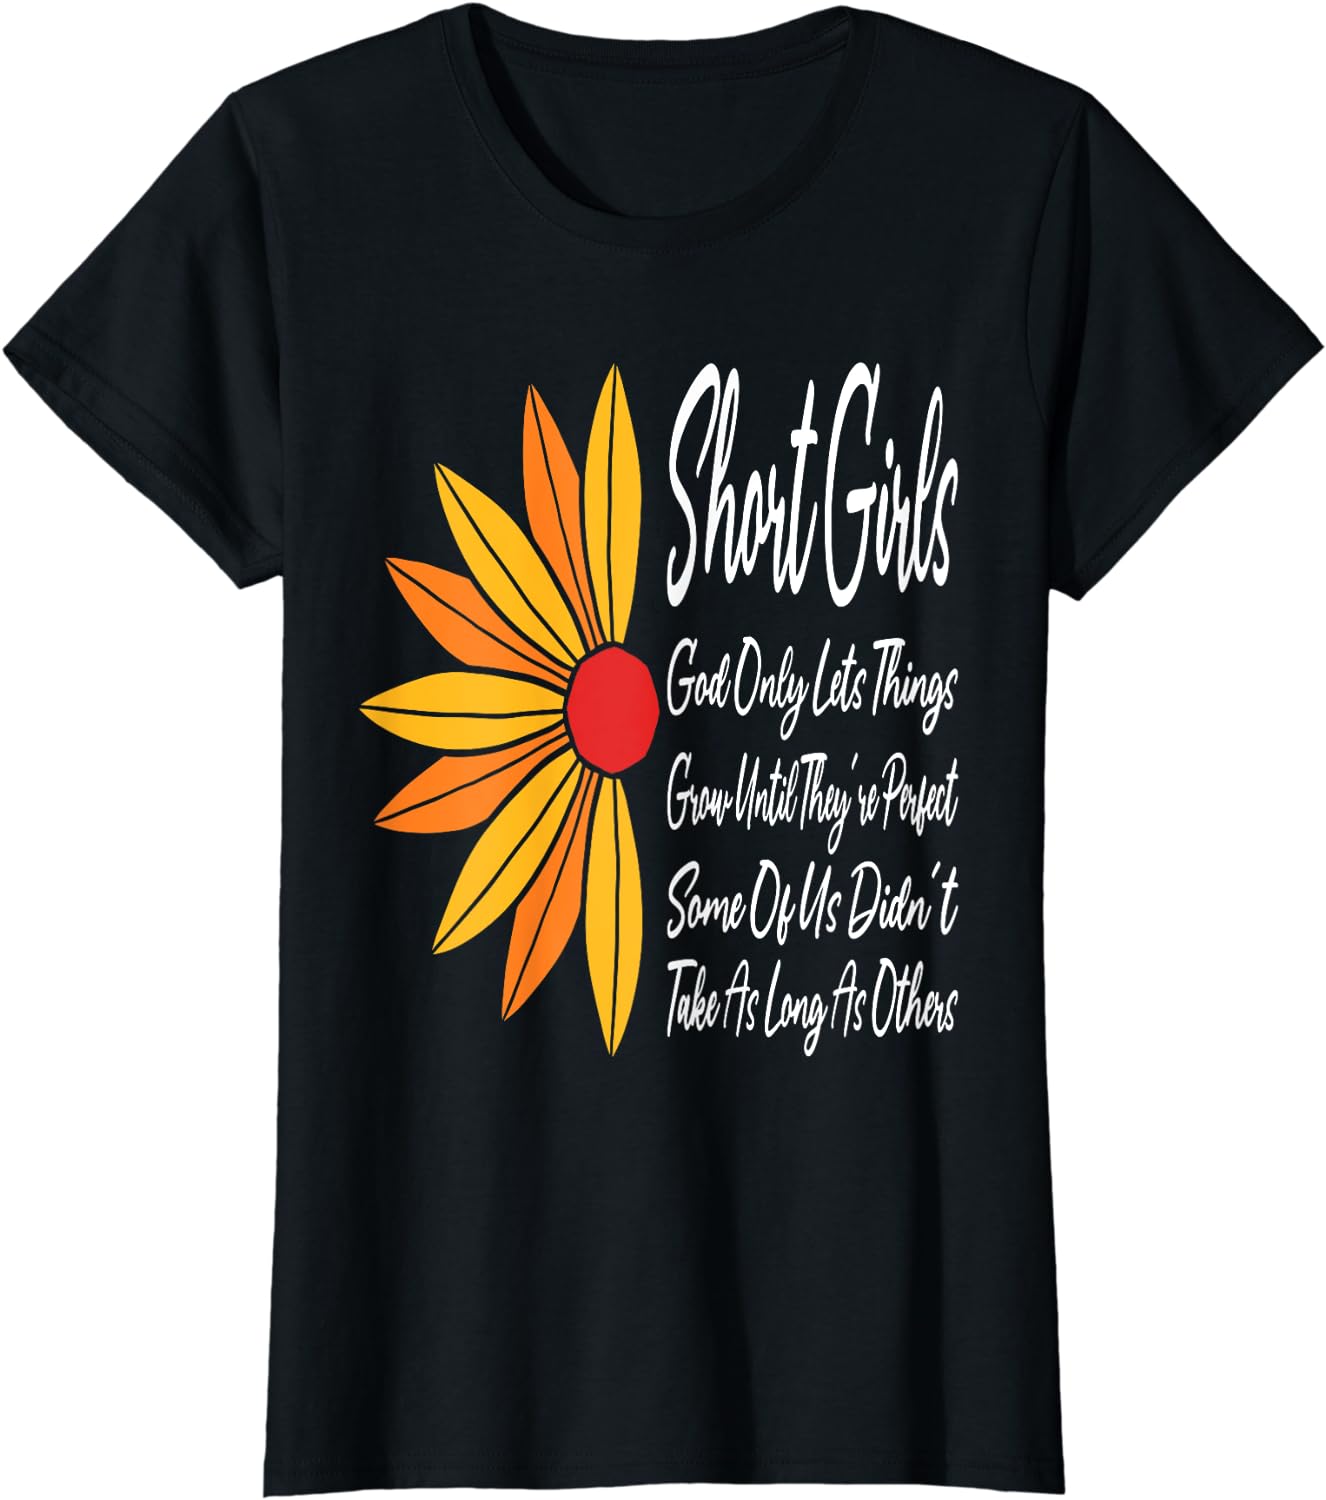 Womens Short Girls God Only Lets Things Grow Until They're Perfect T ...